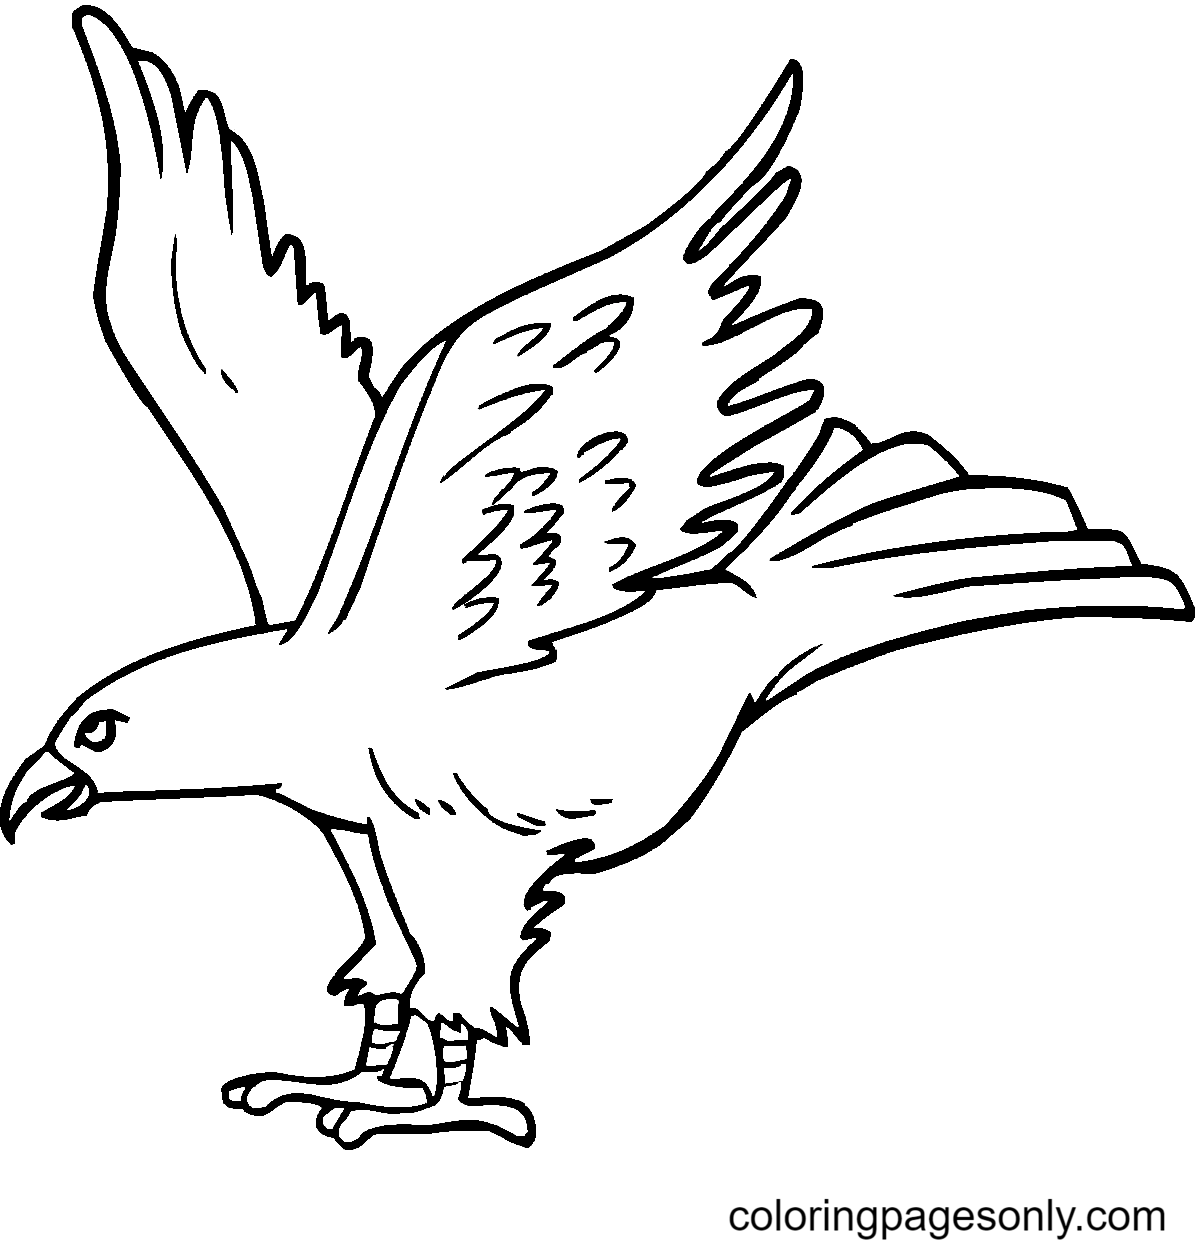 Free Printable Eagle Coloring Page